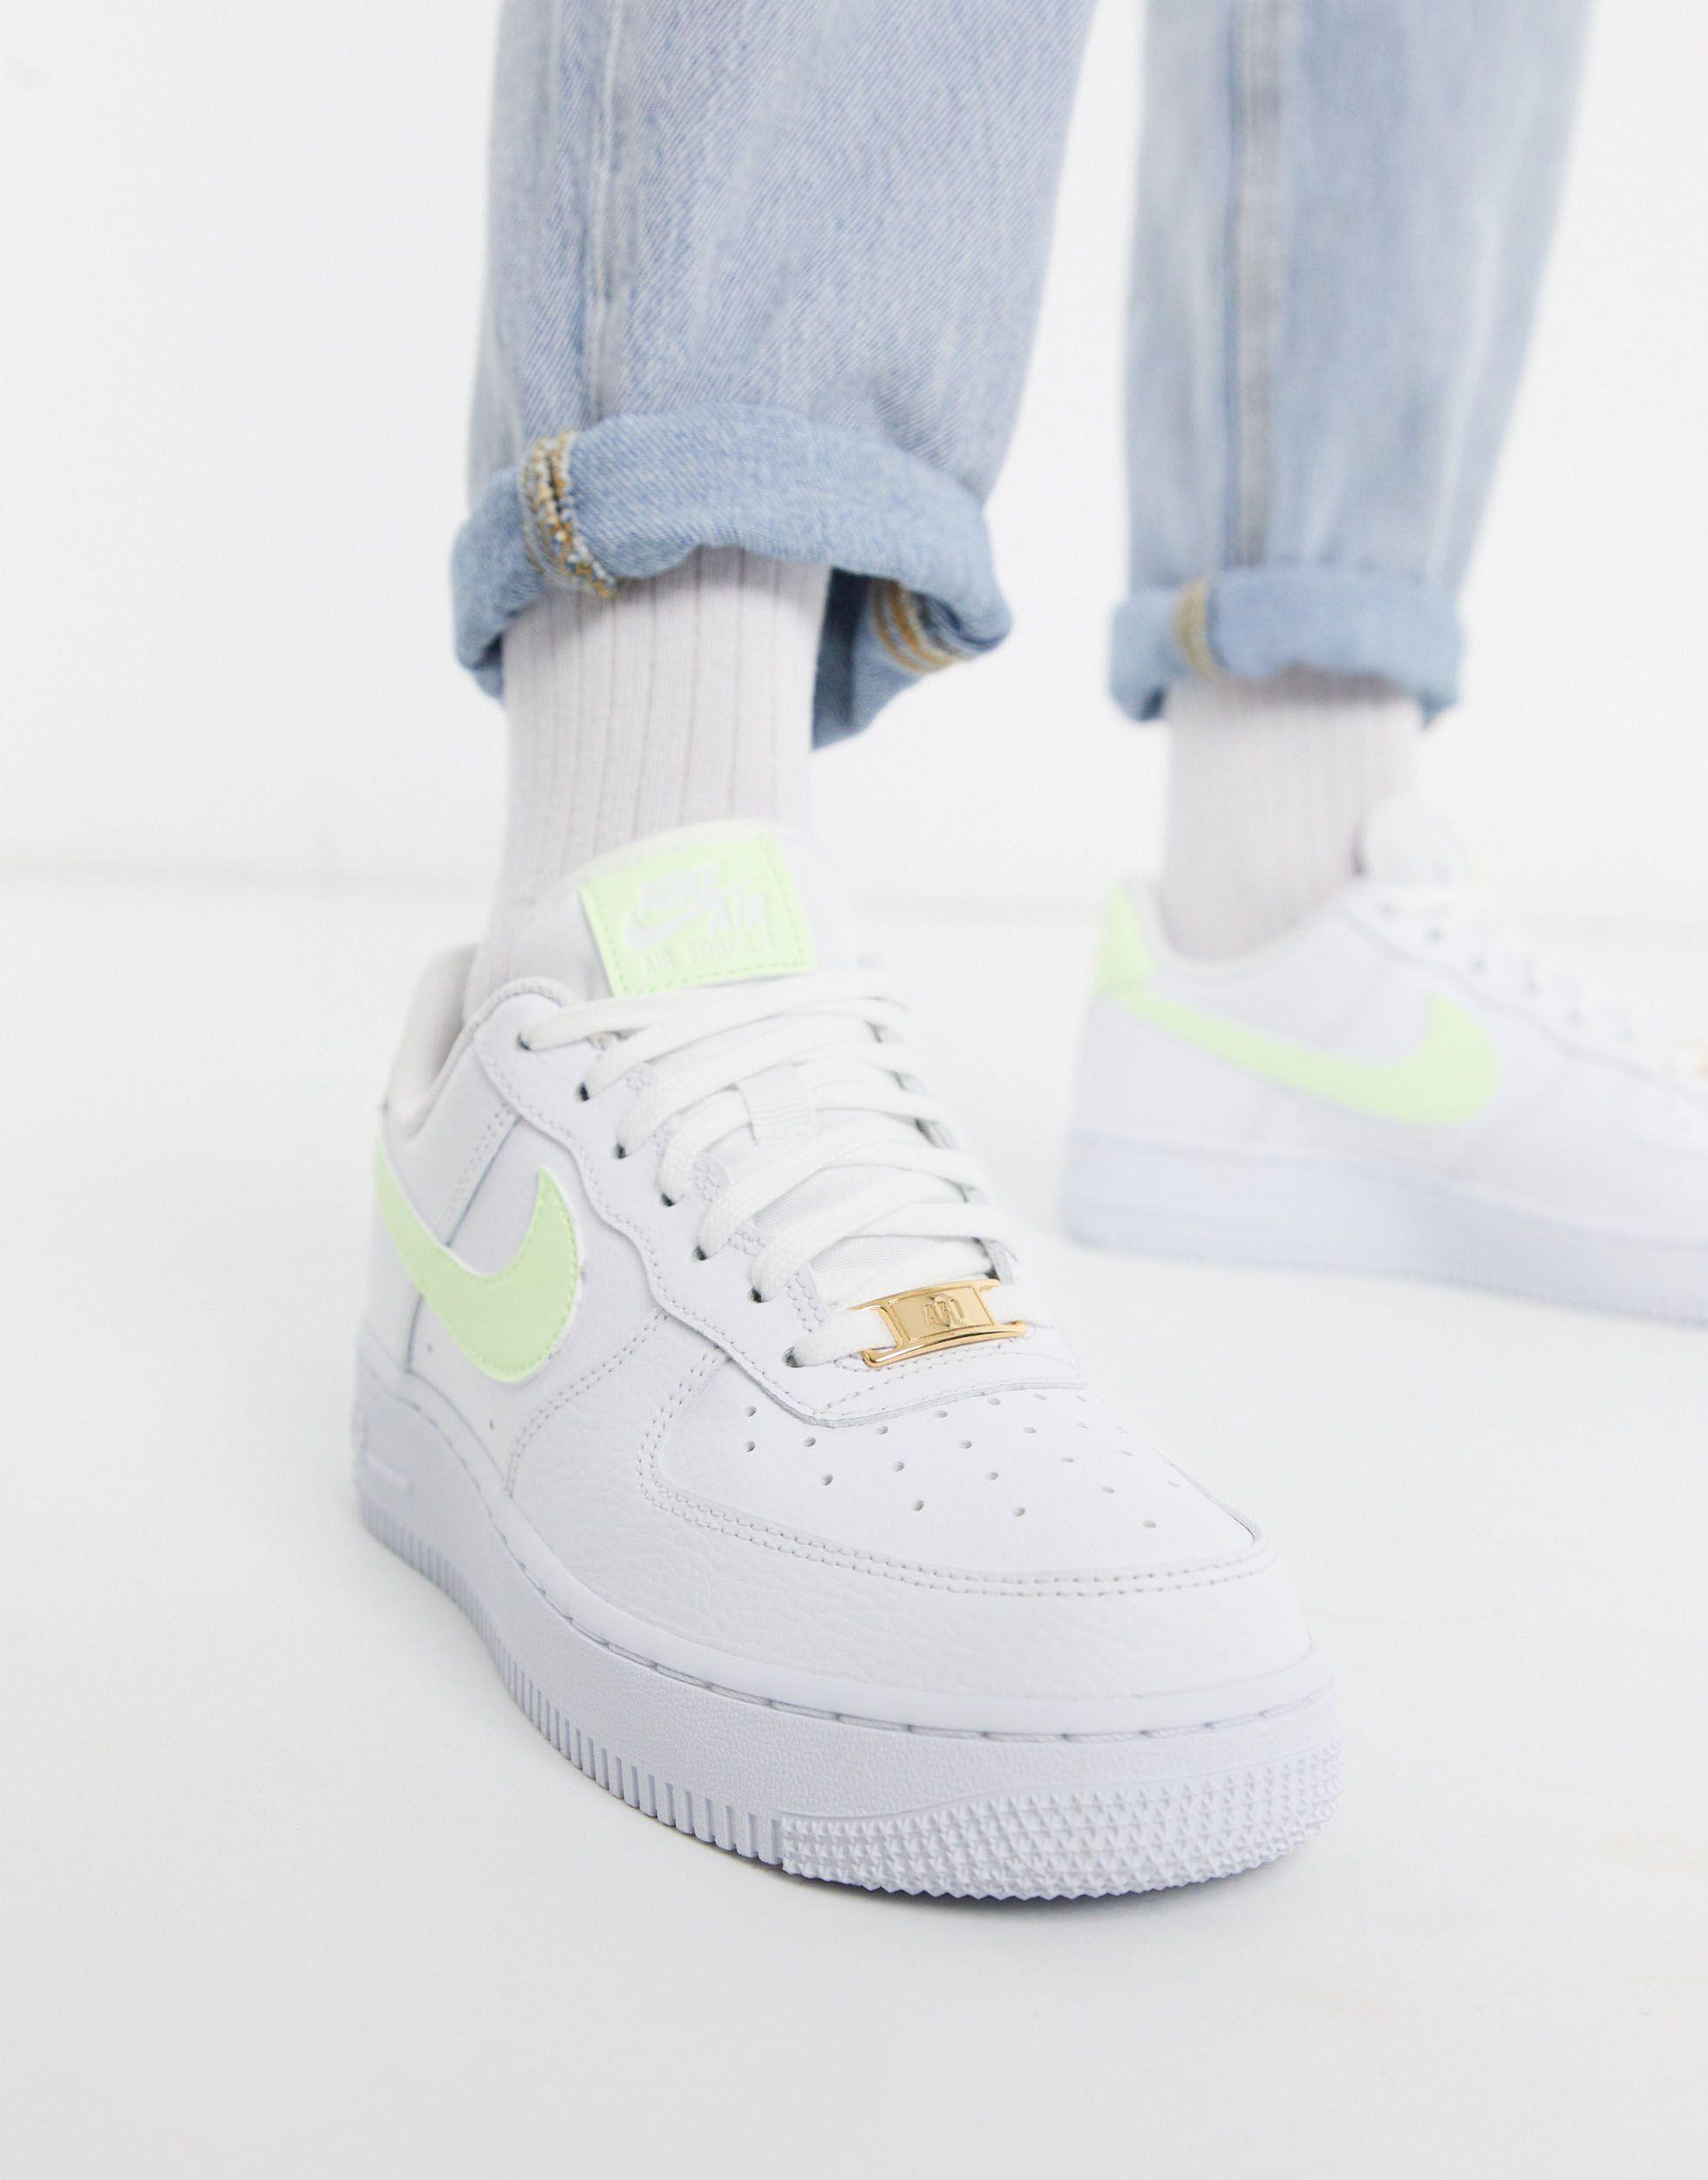 Nike Air Force 1 '07 White And Fluro Green Sneakers | Lyst